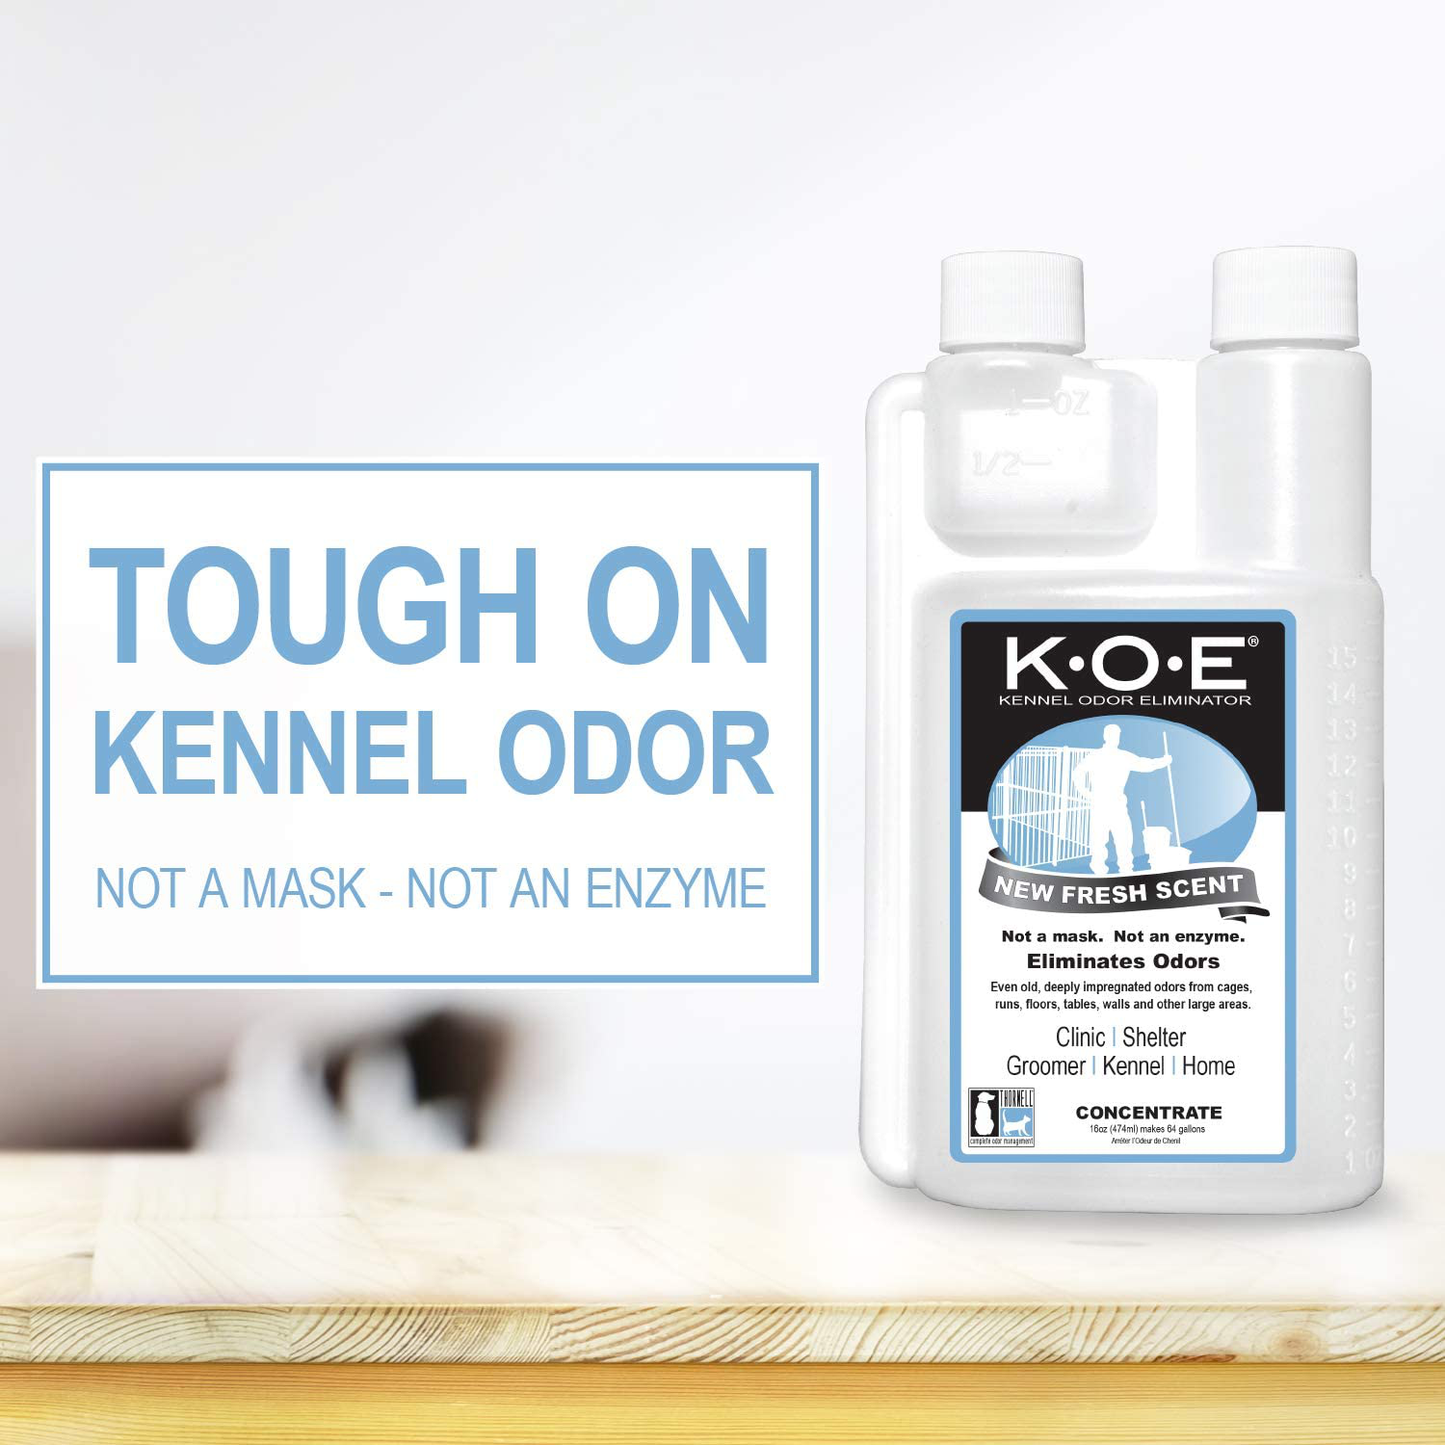 THORNELL KOEFS-P K.O.E Kennel Odor Eliminator Fresh Scent Concentrate Animals & Pet Supplies > Pet Supplies > Dog Supplies > Dog Kennels & Runs Odorcide   